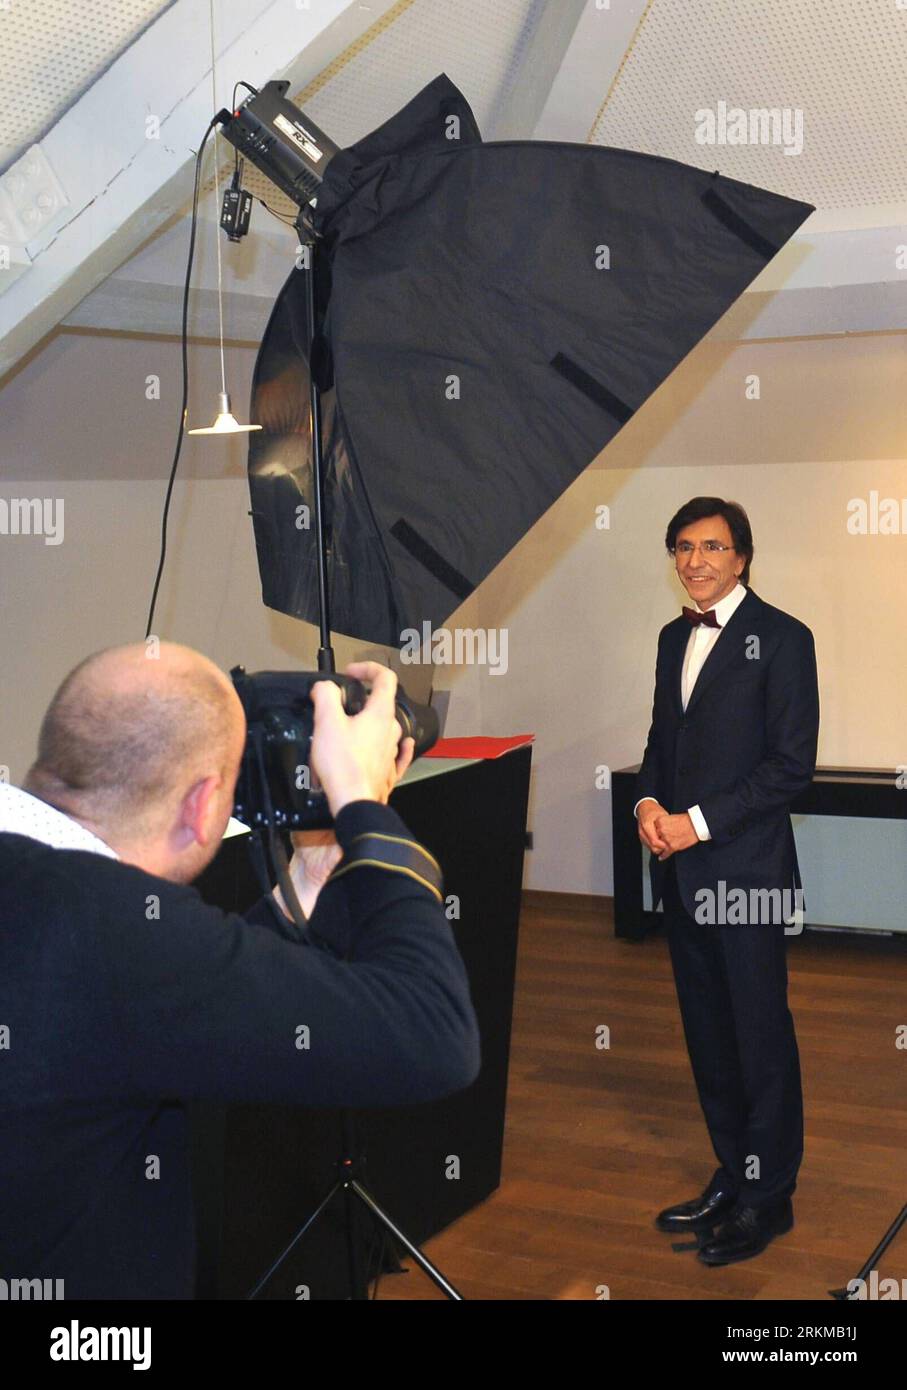 Bildnummer: 56651951  Datum: 06.12.2011  Copyright: imago/Xinhua (111206) -- BRUSSELS, Dec. 6, 2011 (Xinhua) -- Belgian new Prime Minister Elio Di Rupo (R) stands for an official portrait before the first cabinet meeting in Brussels, capital of Belgium, Dec. 6, 2011. The inauguration of the new government marked the ending of a record 18-months long political deadlock of Belgium. (Xinhua/Ye Pingfan) (ypf) BELGIUM-BRUSSELS-NEW GOVERNMENT PUBLICATIONxNOTxINxCHN People Politik neue Regierung Belgien x0x xtm 2011 hoch premiumd      56651951 Date 06 12 2011 Copyright Imago XINHUA  Brussels DEC 6 20 Stock Photo